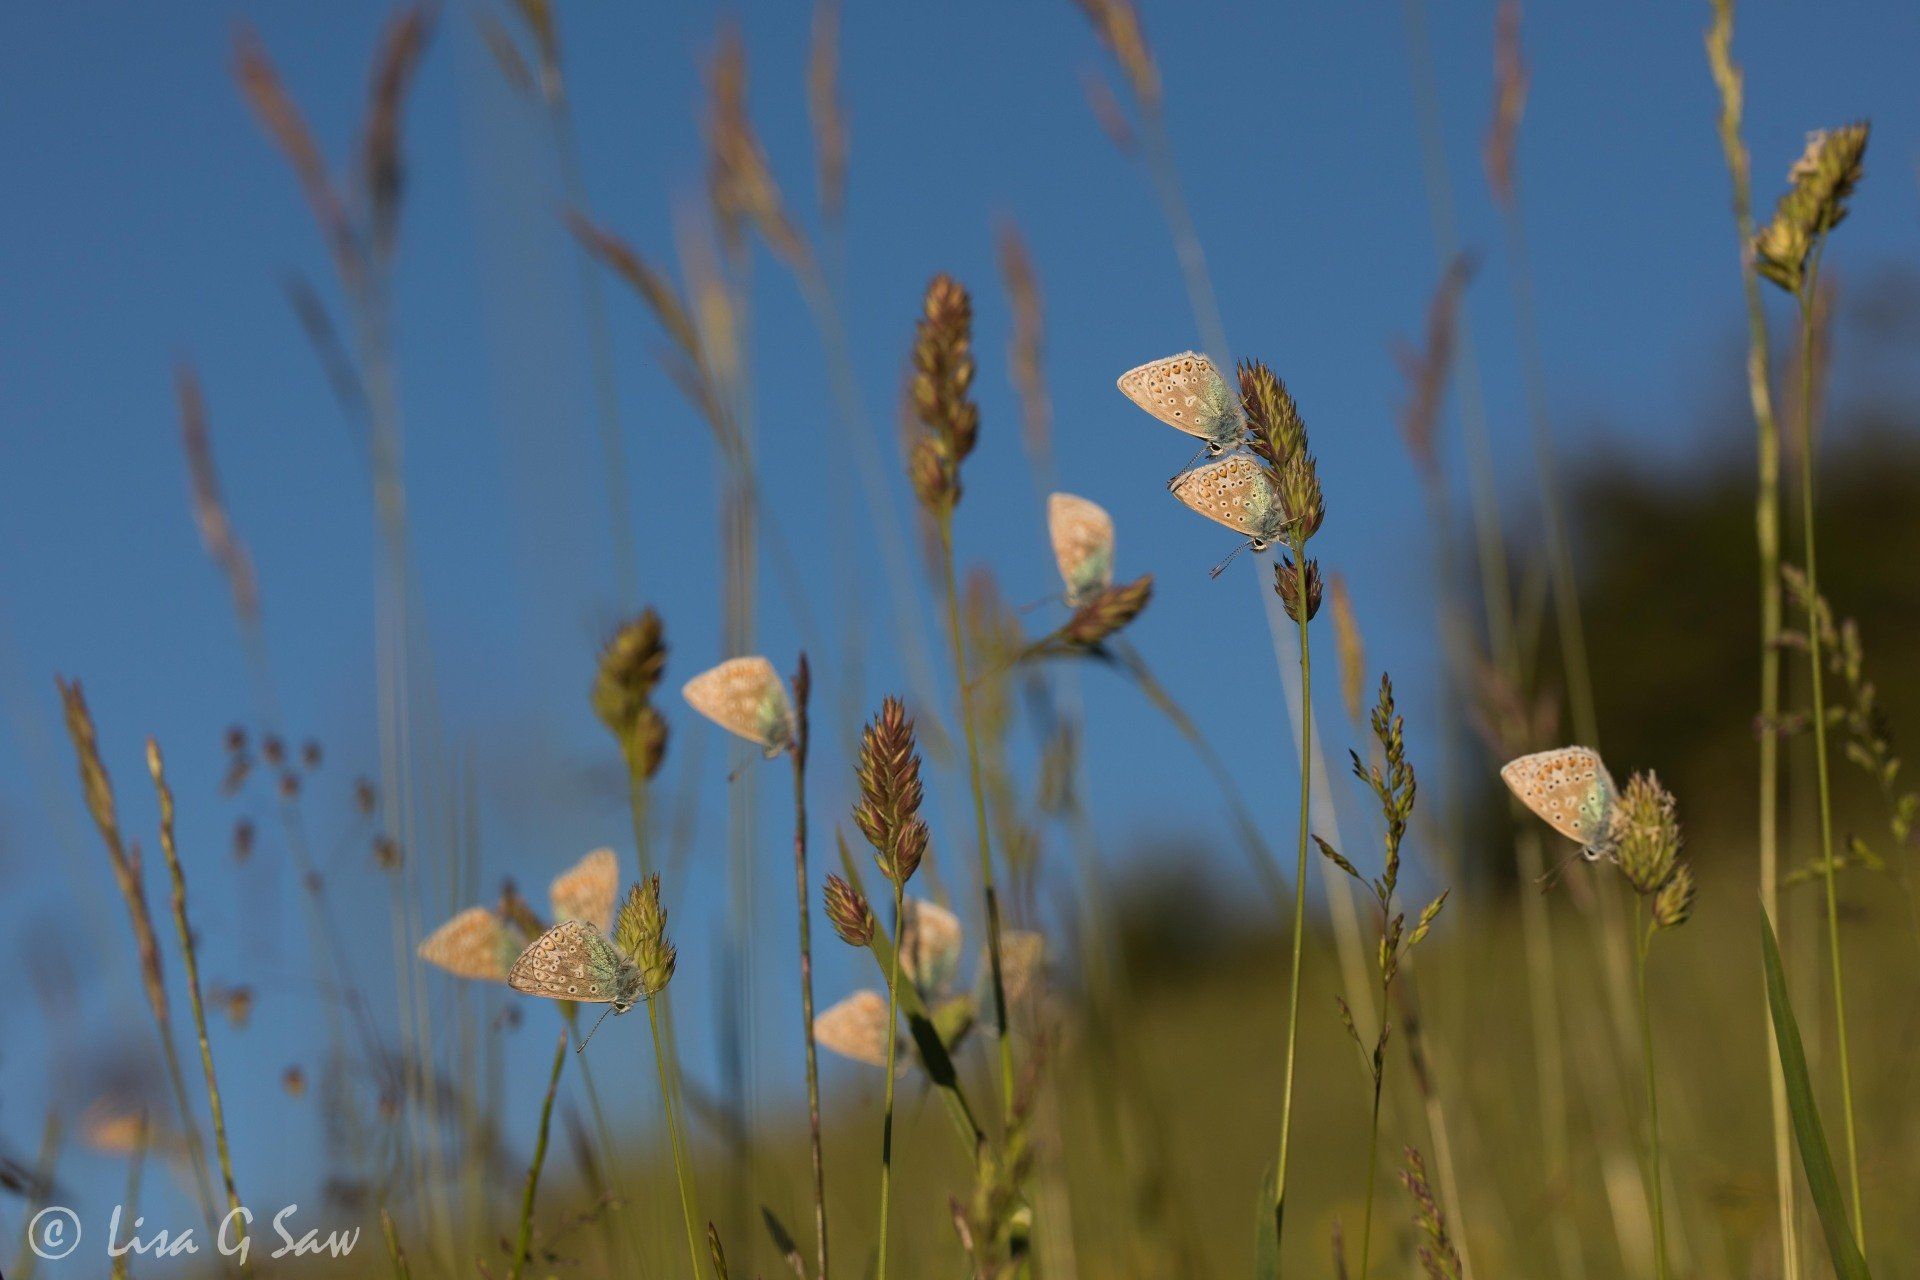 Lots of Common Blue butterflies roosting on tall grass